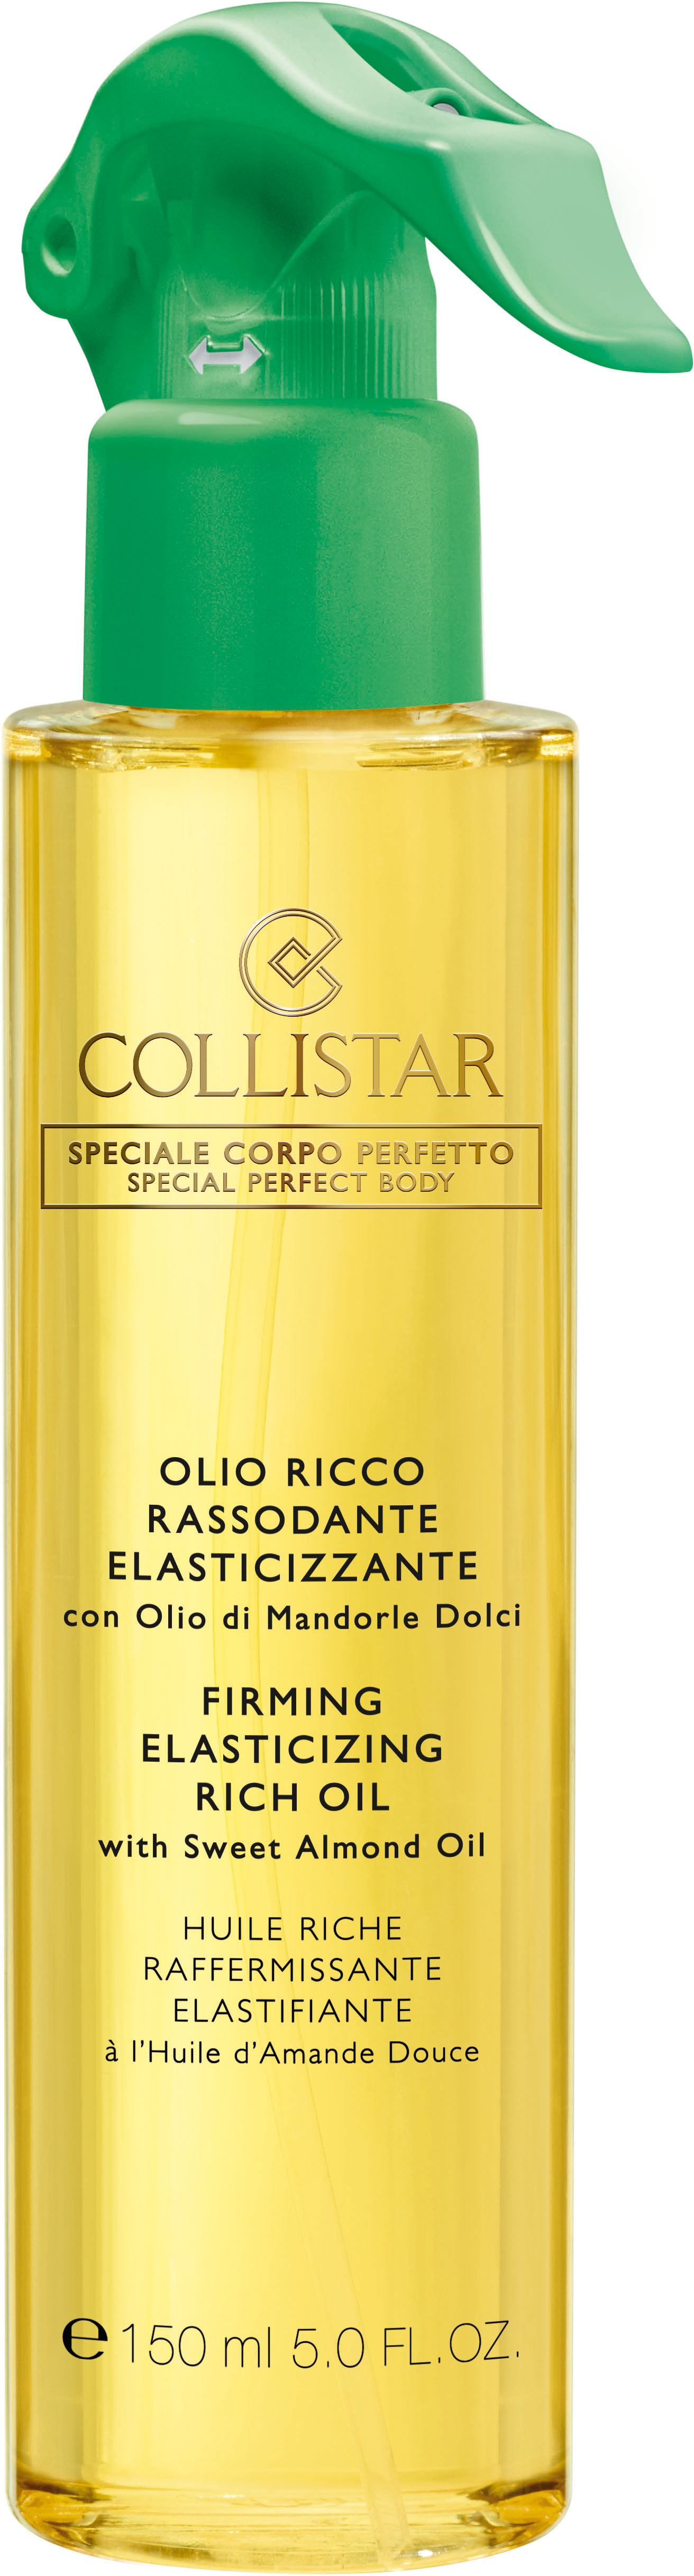 Collistar Firming Elasticizing Rich Oil With Sweet Almond Oil 150ml